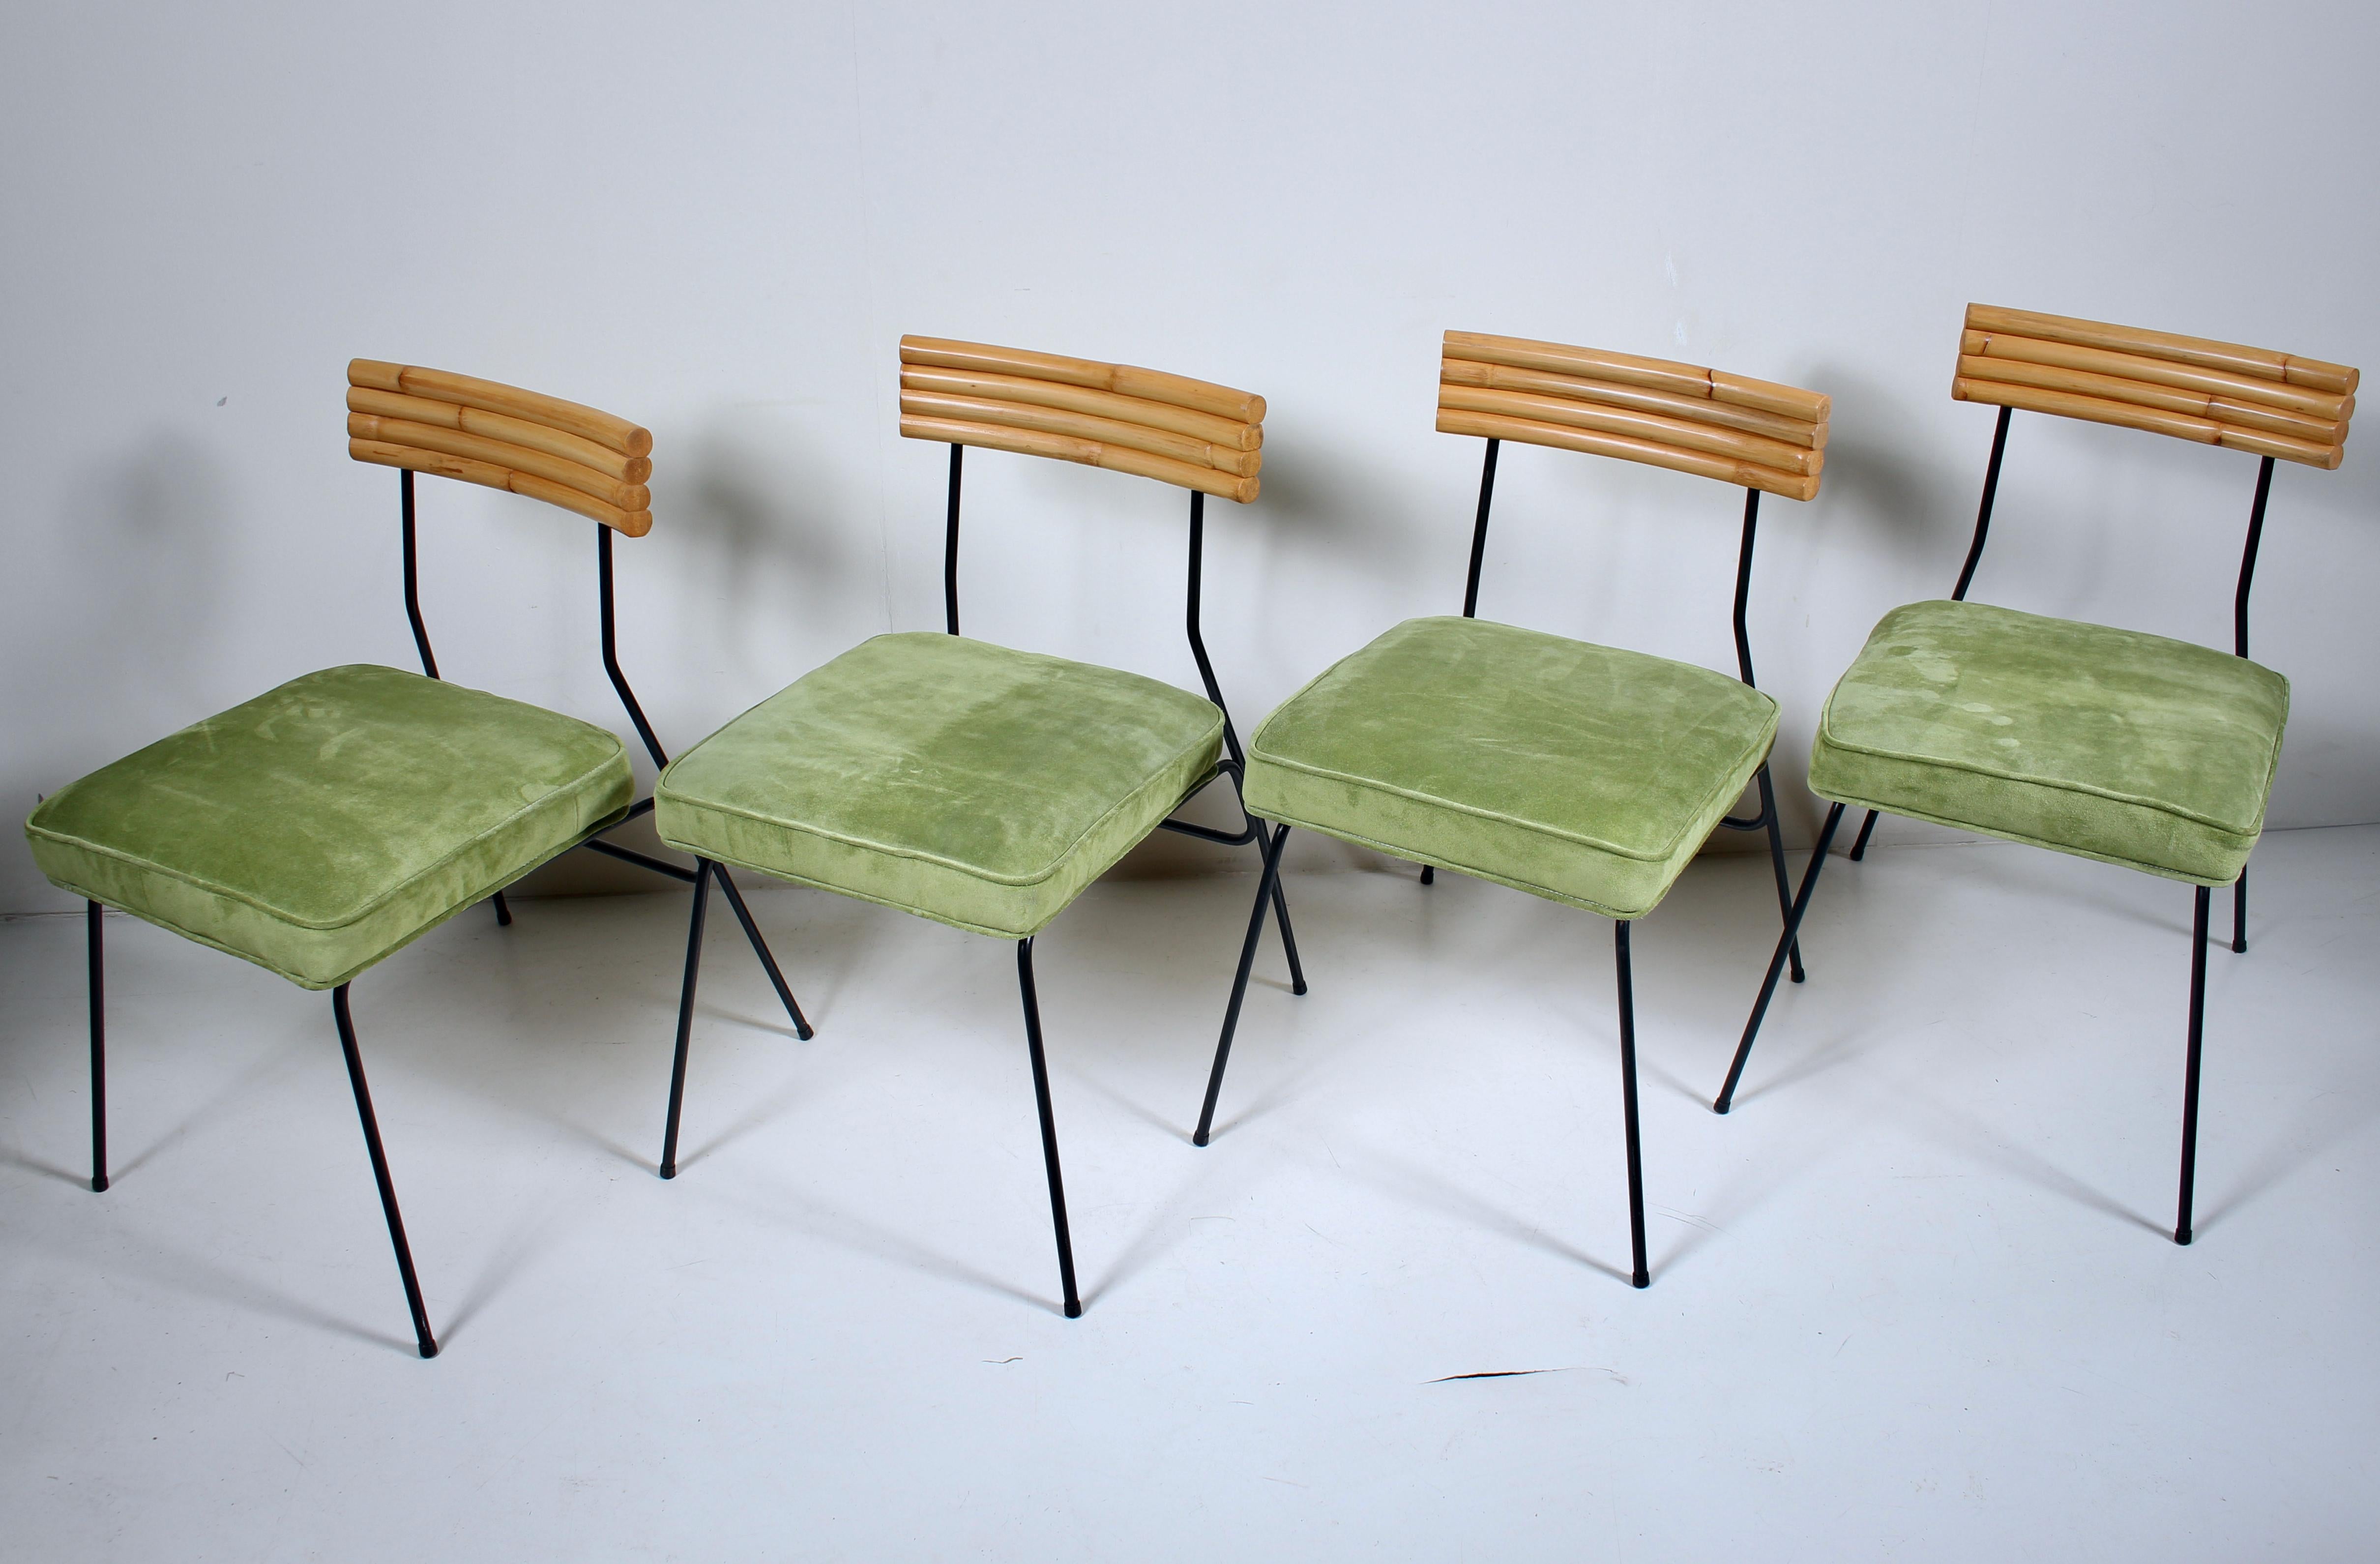 Set of 4 Herb & Shirley Ritts Iron, Bamboo & Suede Dining Side Chairs, 1950s In Good Condition For Sale In Bainbridge, NY